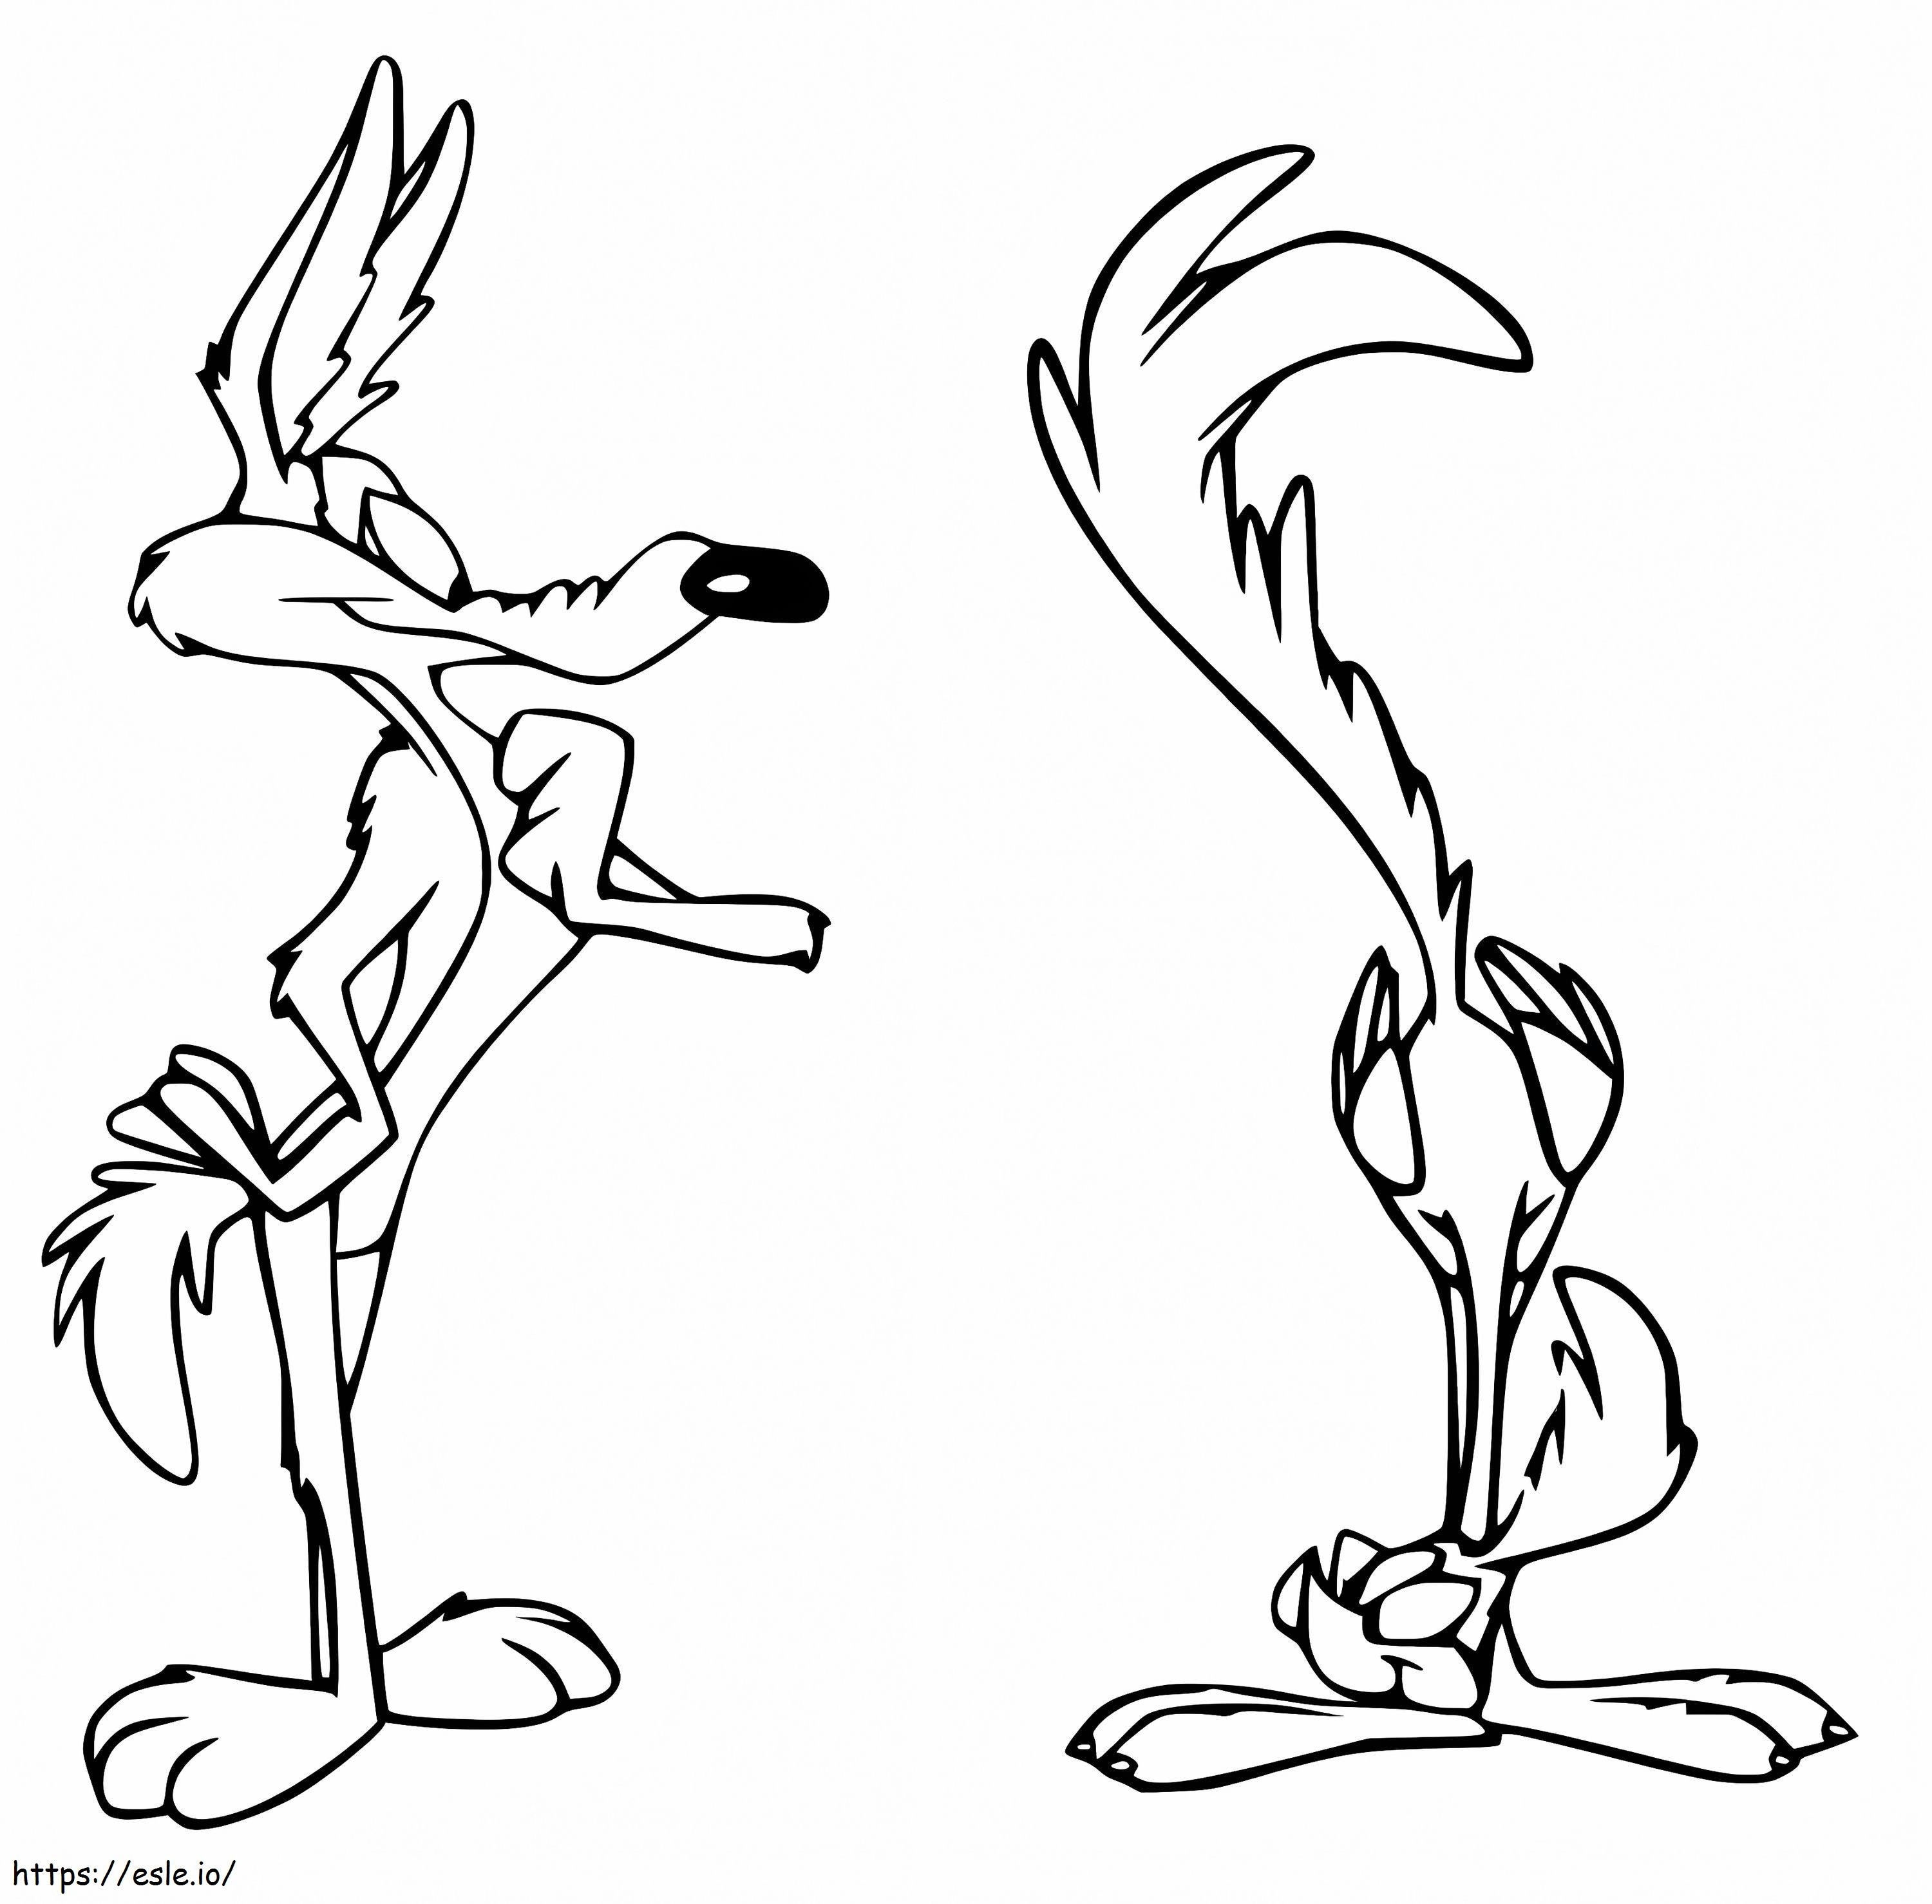 Wile E Coyote And Road Runner coloring page